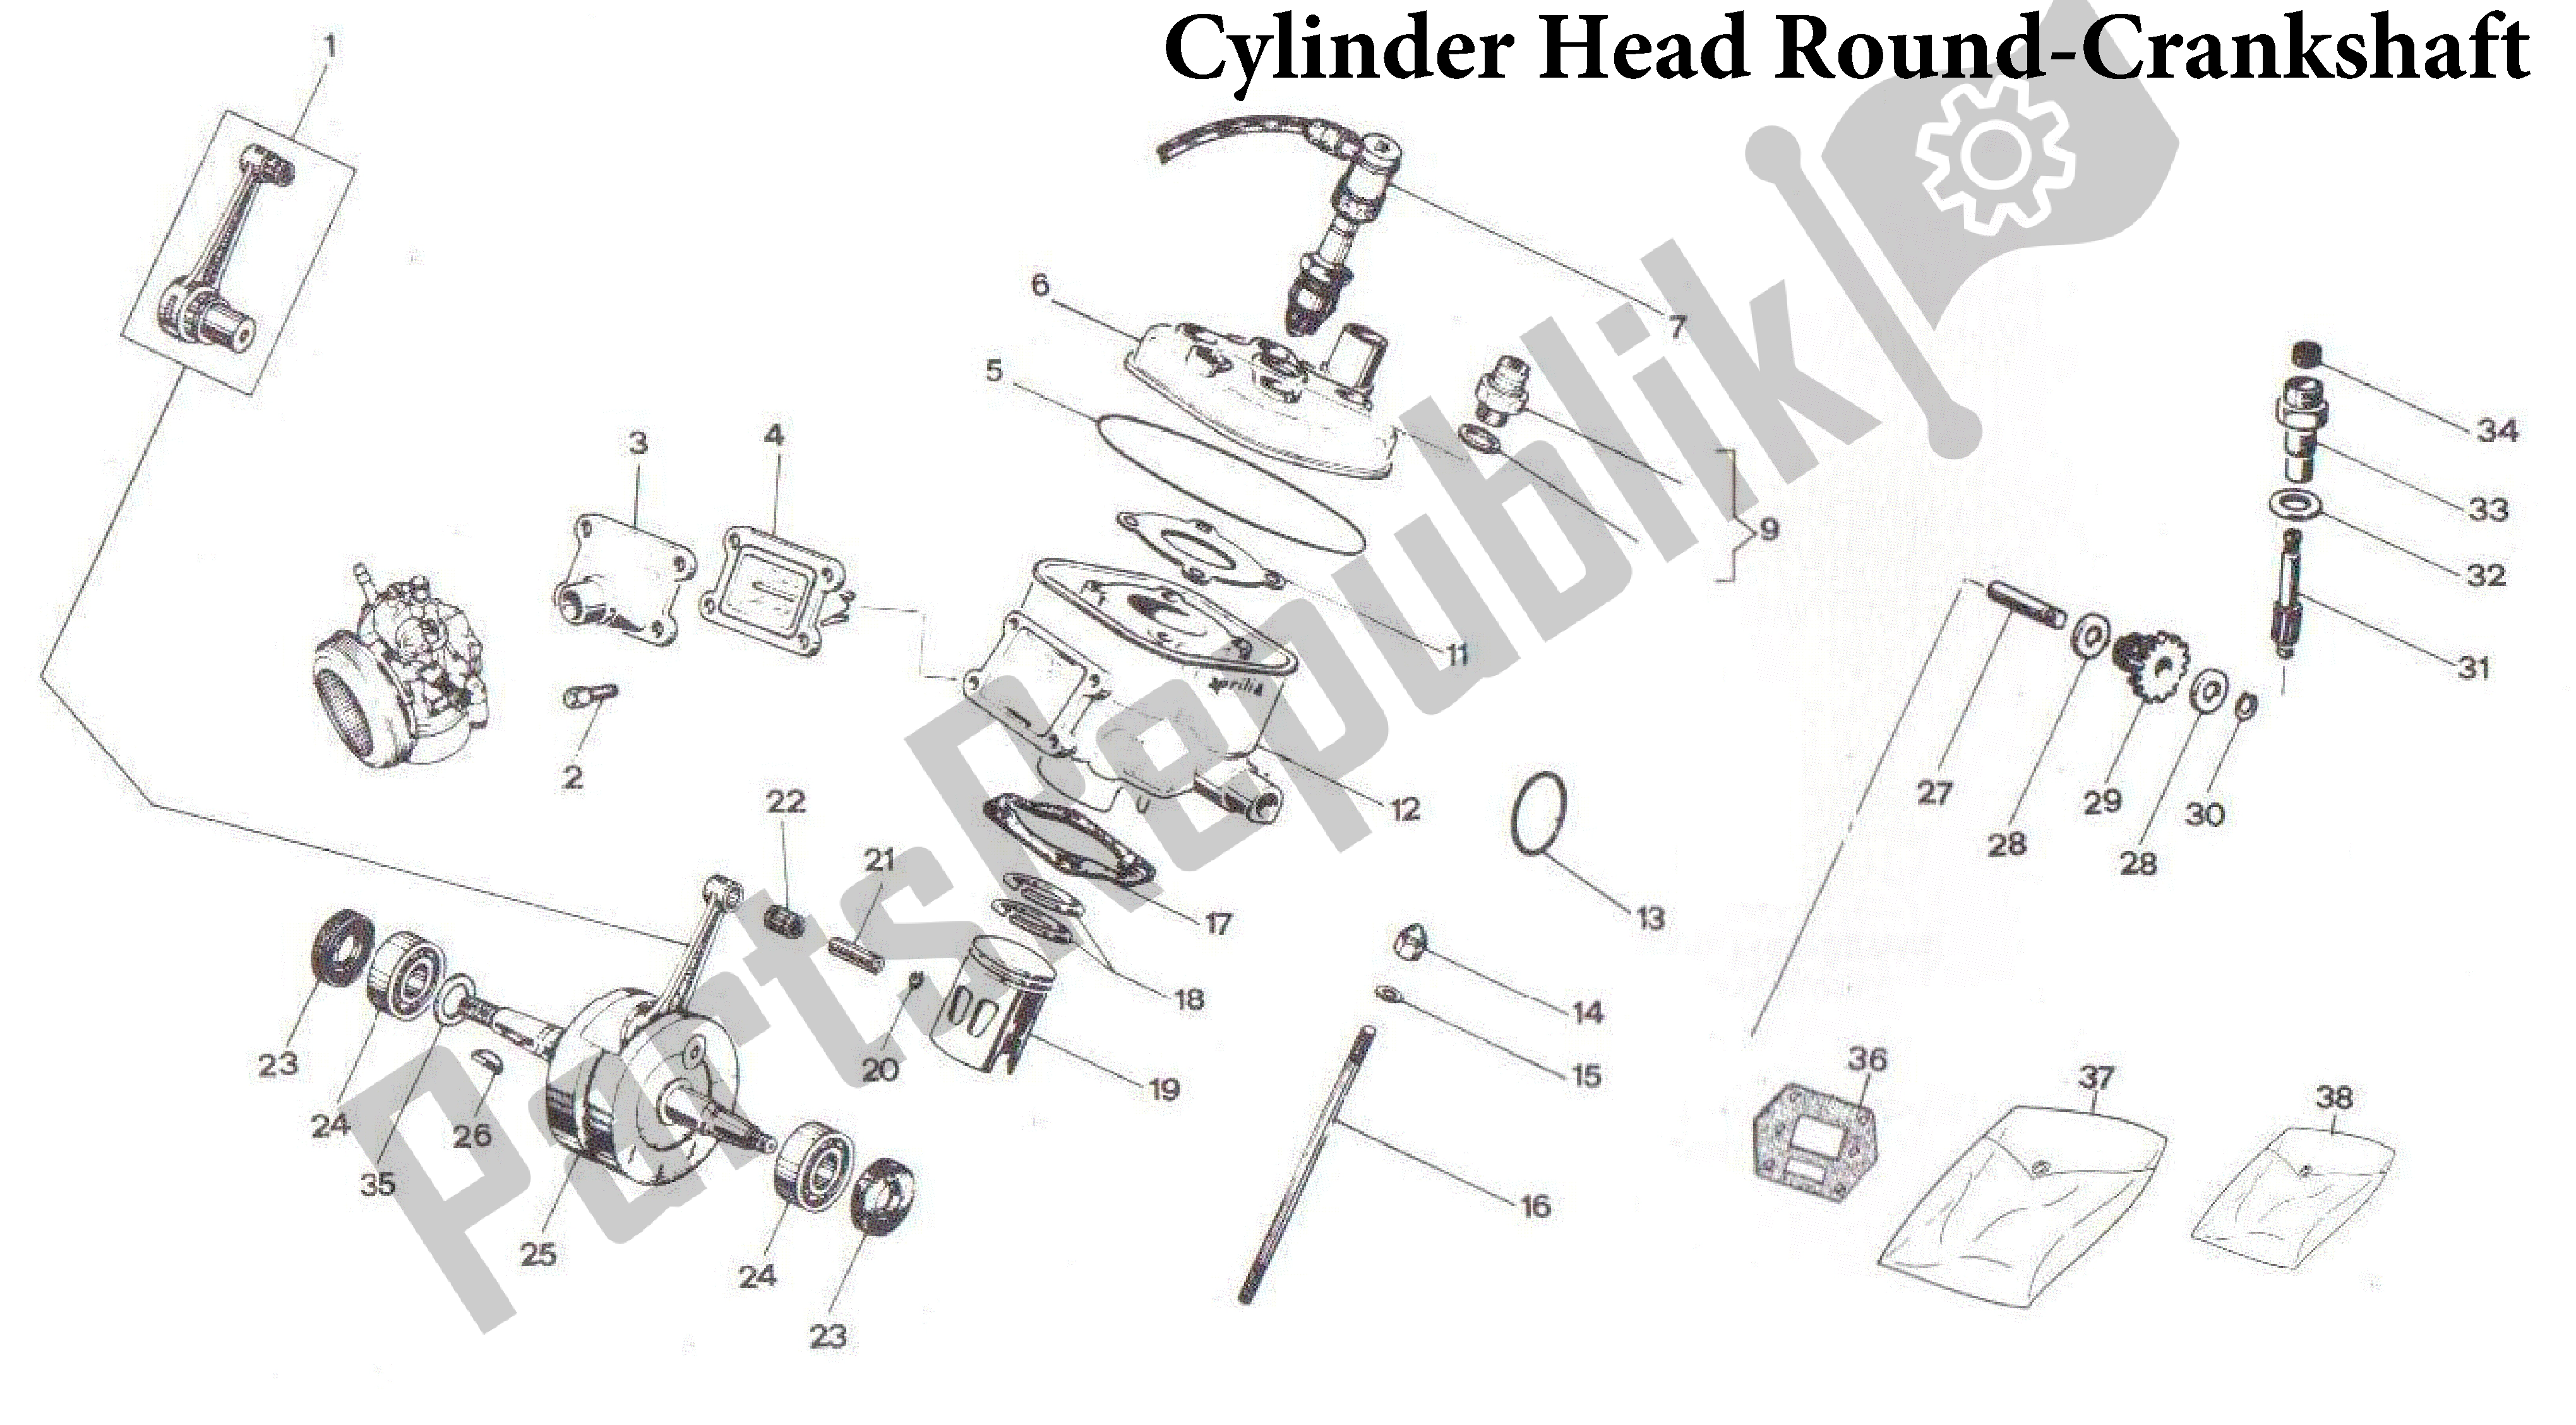 All parts for the Cylinder Head Round-crankshaft of the Aprilia Rally 50 1995 - 2003